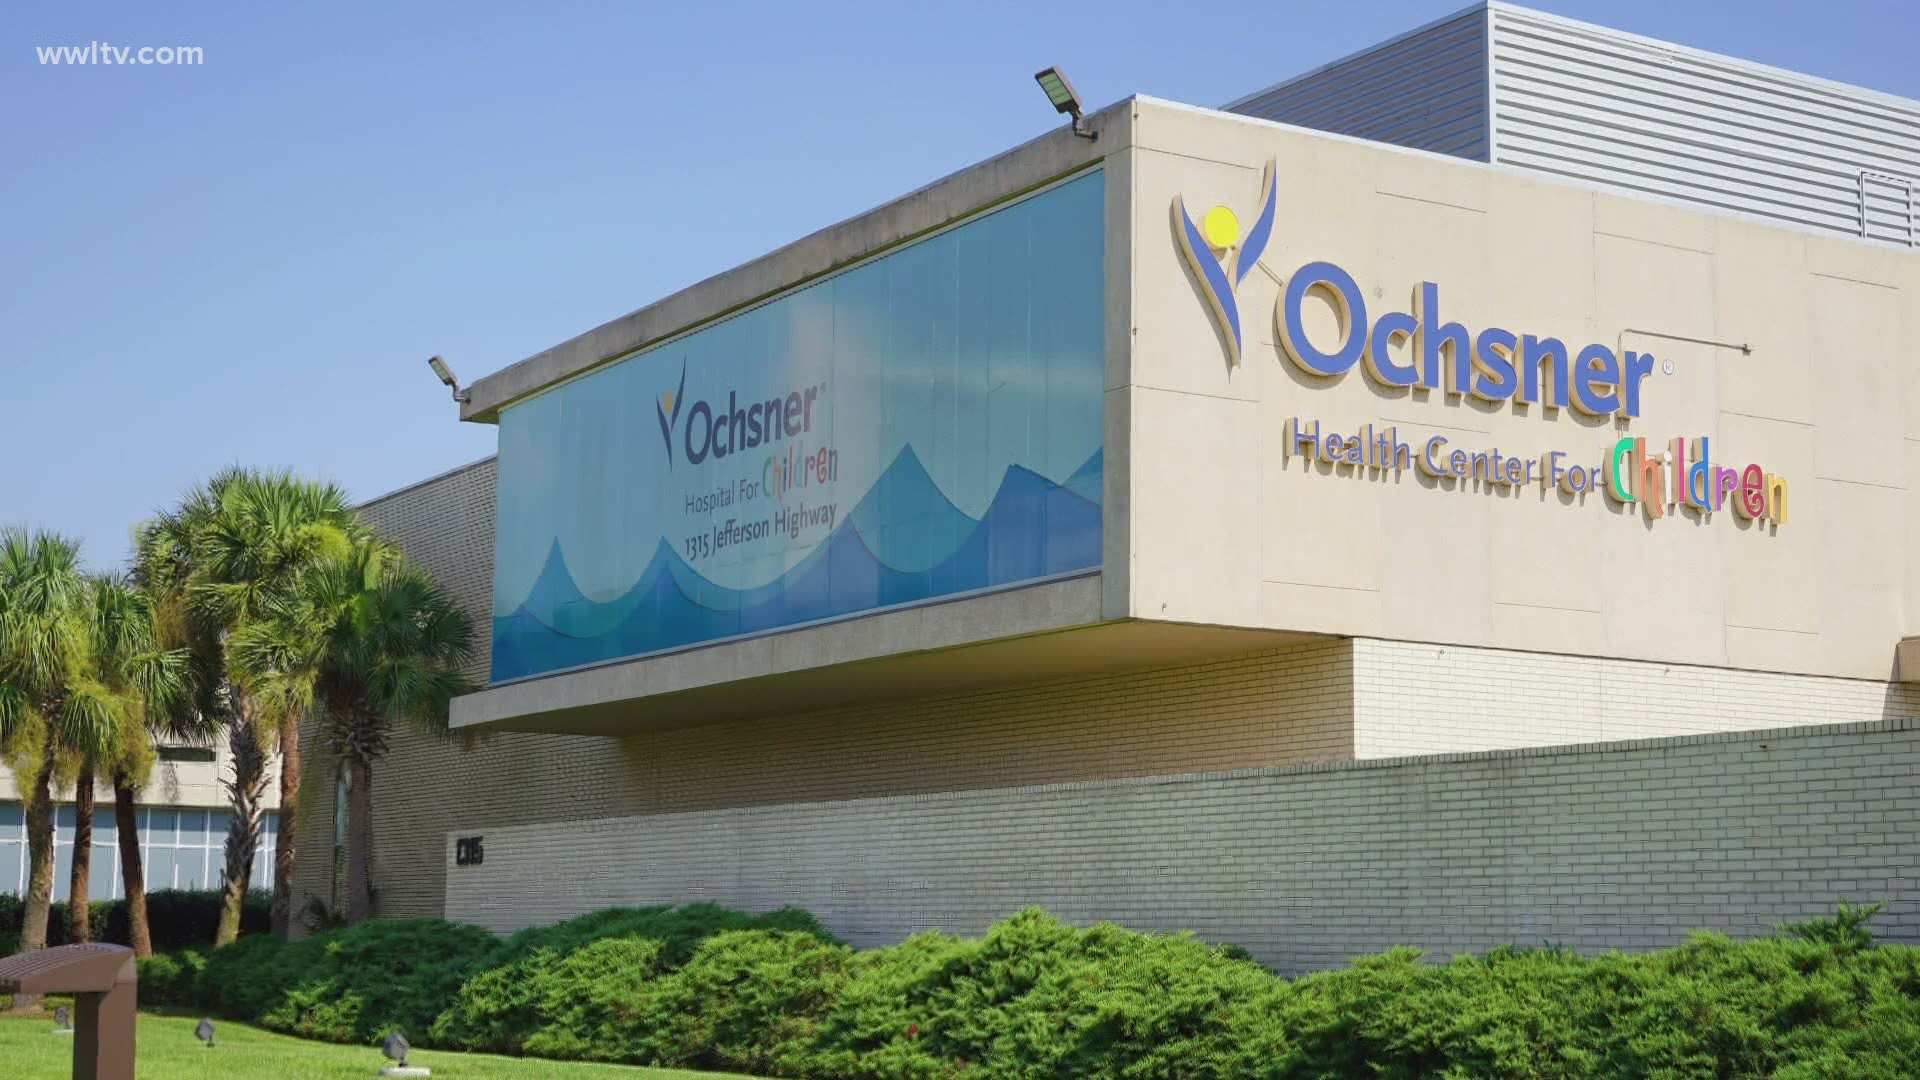 Ochsner will also partner with Xavier to create a center for health equity to address health care access.